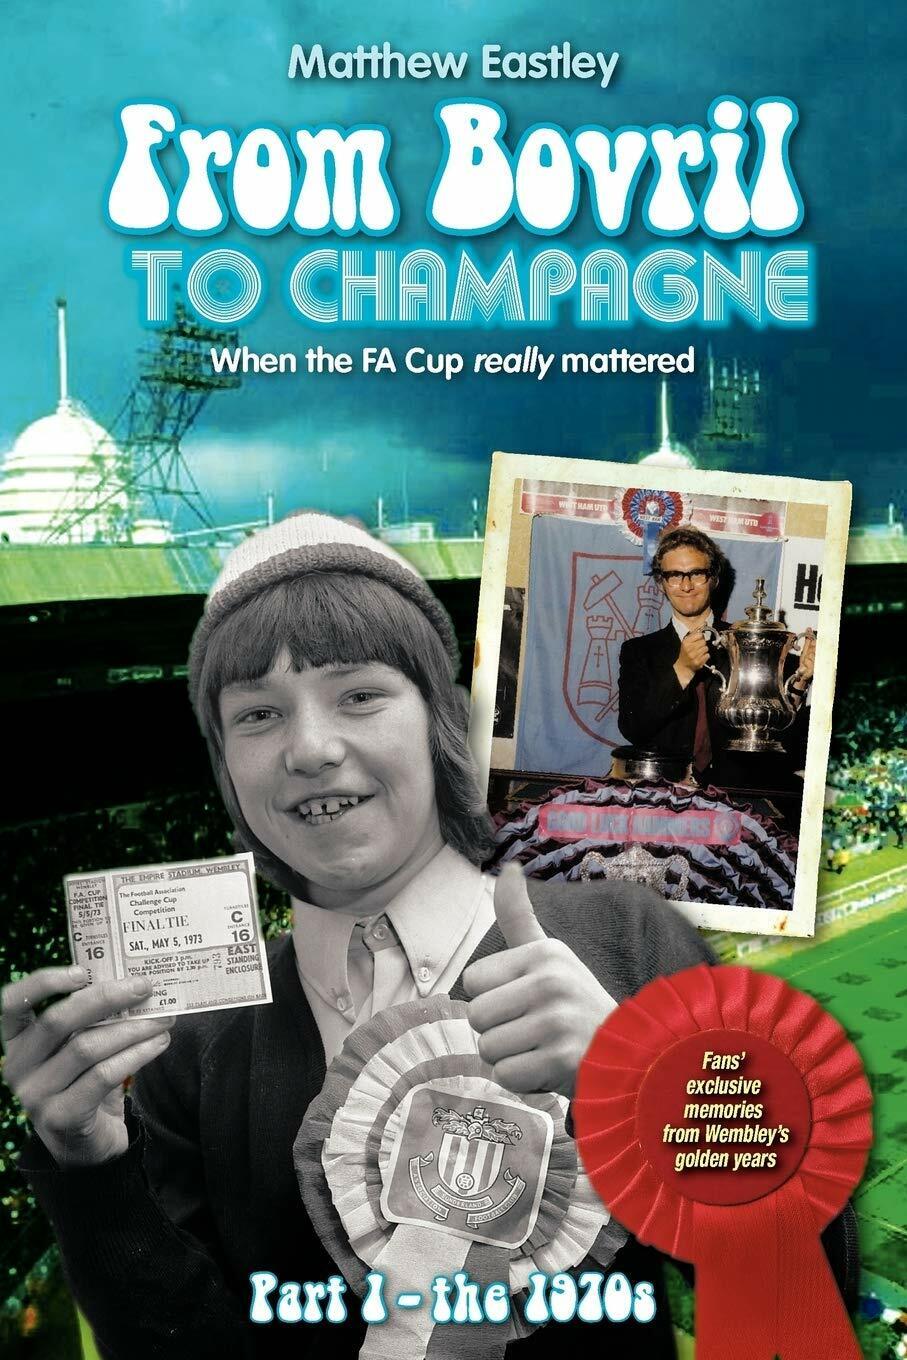 From Bovril to Champagne - Matthew Eastley - AUTHORHOUSE, 2010 libro usato